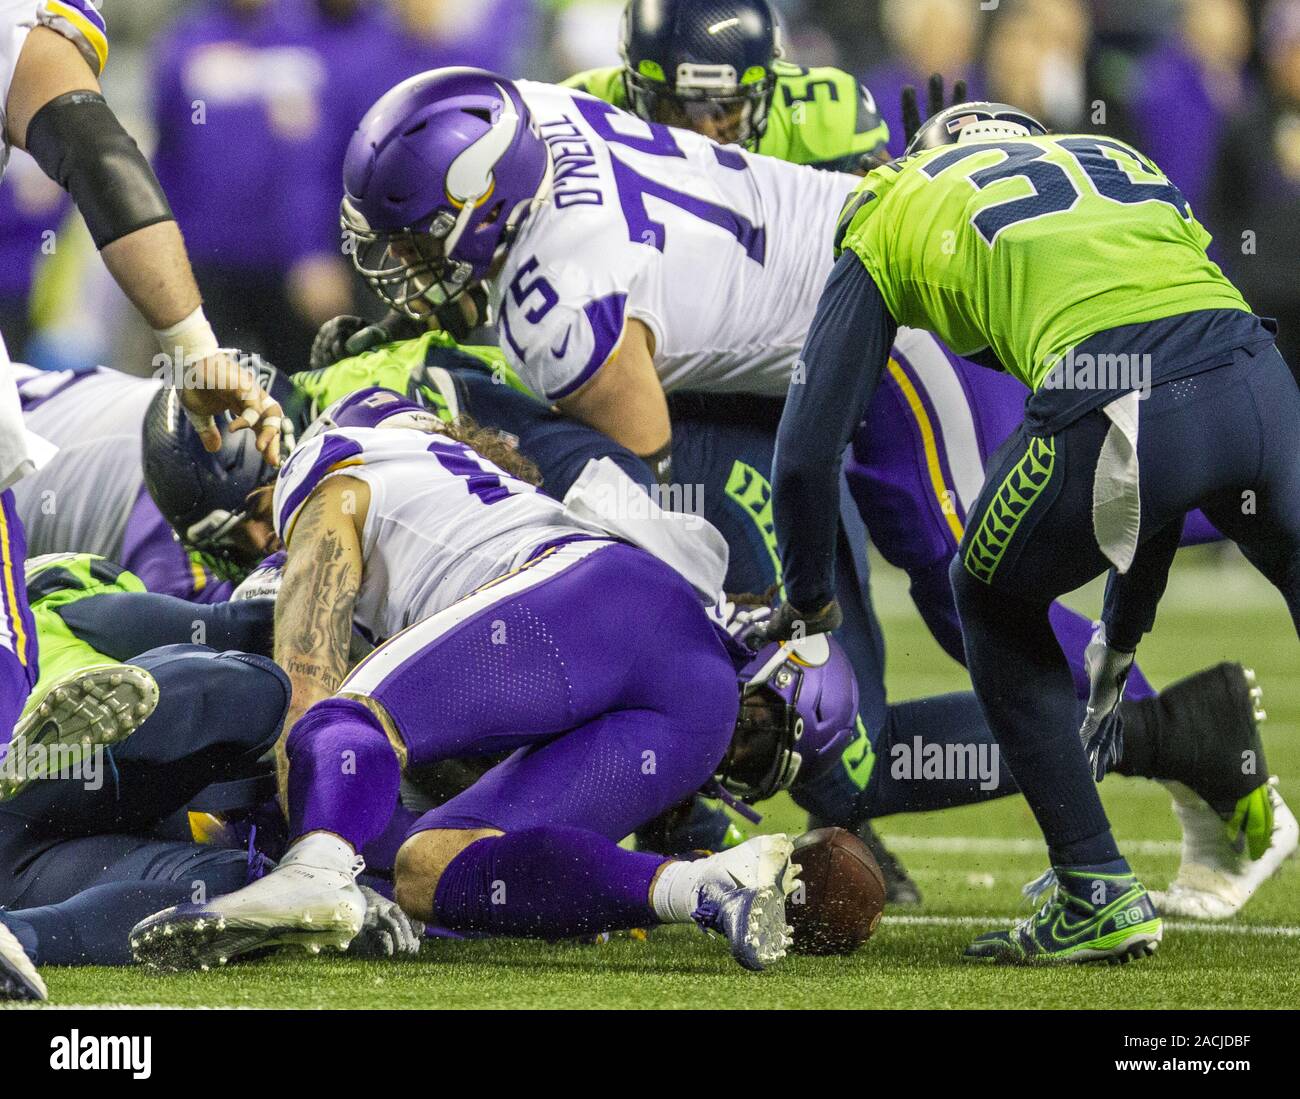 Seattle, United States. 02nd Dec, 2019. Seattle Seahawks strong safety Bradley McDougald (30) recovers a fumble by Minnesota Vikings running back Dalvin Cook (33) during the third quarter at CenturyLink Field in a Monday Night Football game on December 2, 2019 in Seattle, Washington. The Seahawks beat the Vikings 37-30. Photo by Jim Bryant/UPI Credit: UPI/Alamy Live News Stock Photo